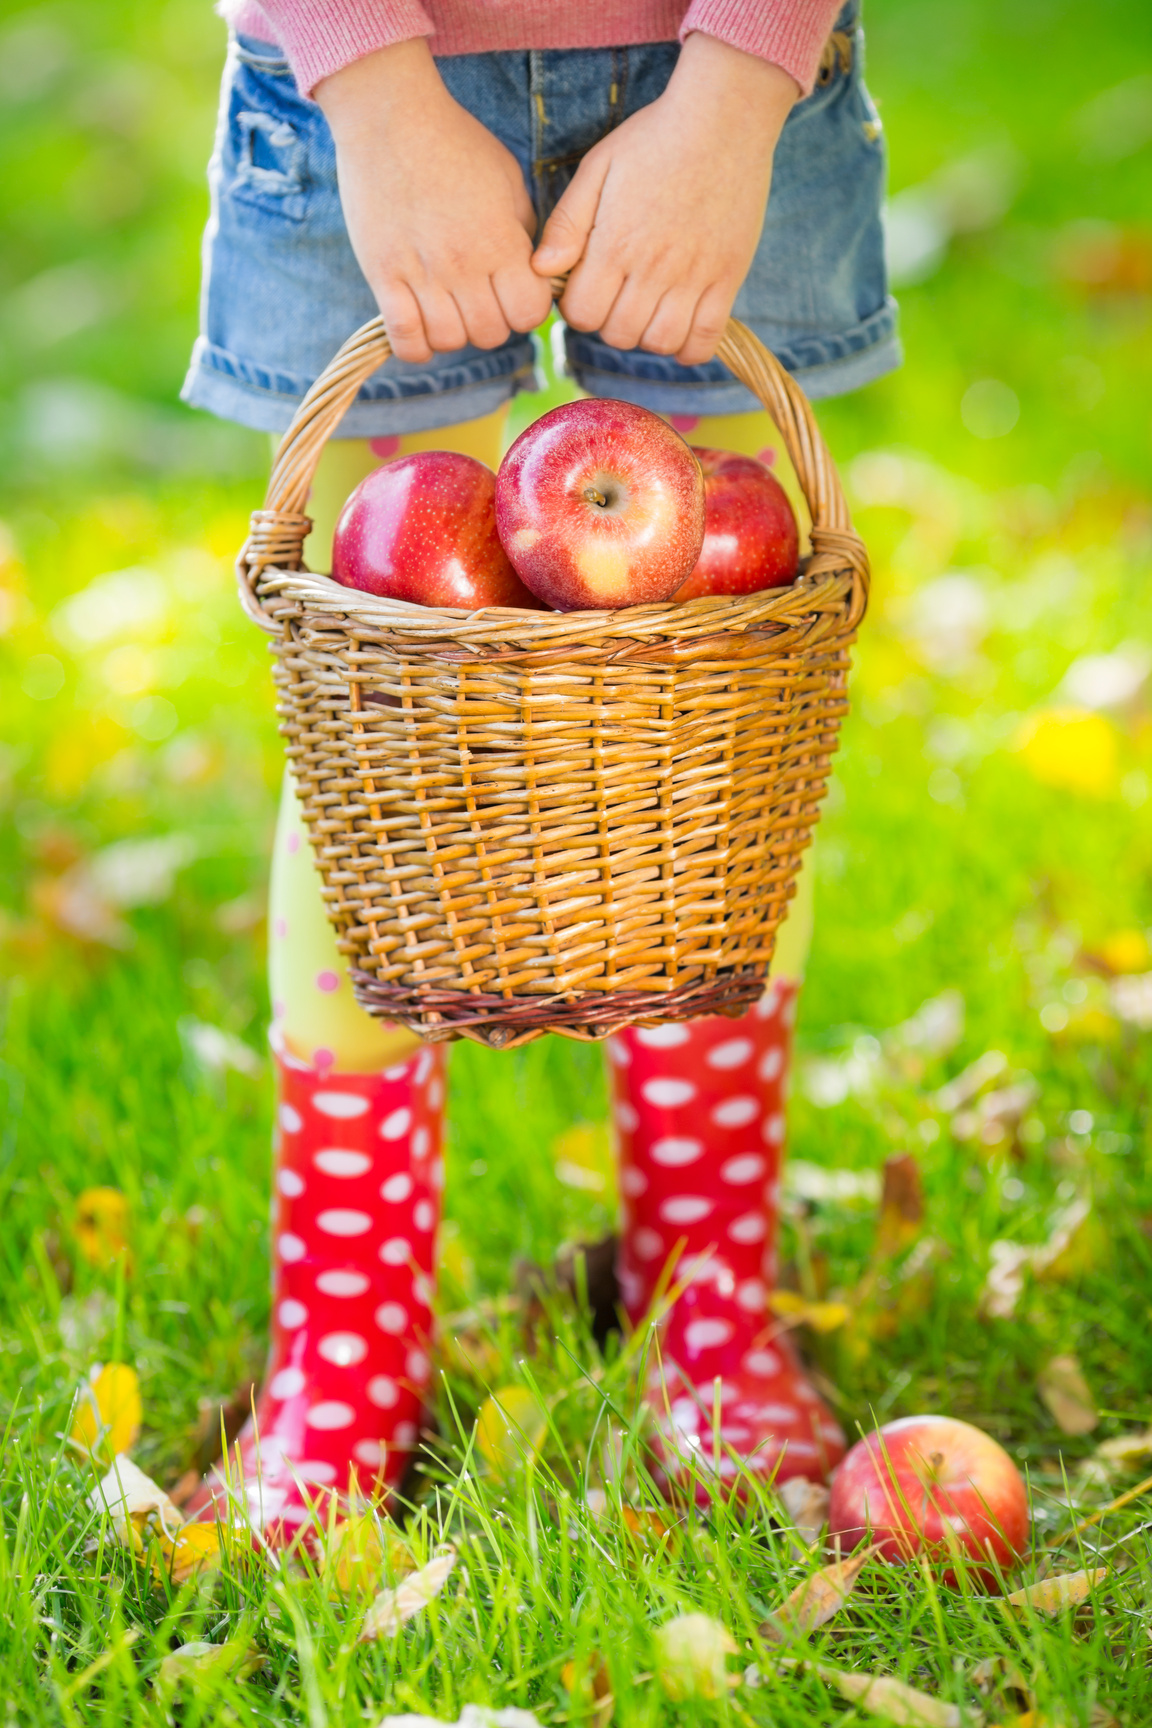 Kid Holding Basket with Apples